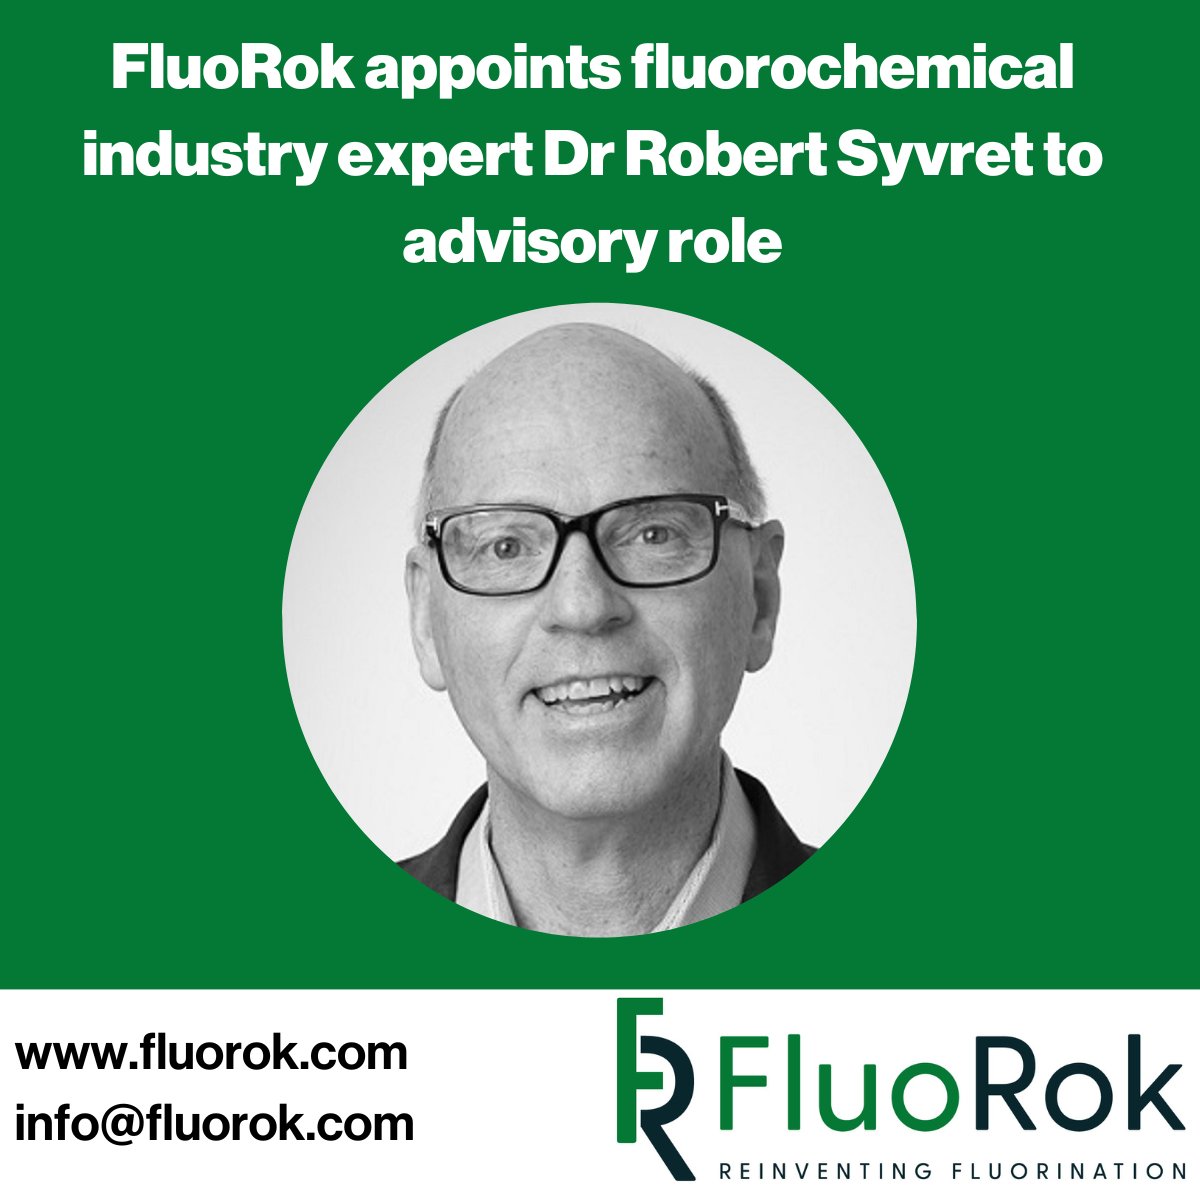 Robert G. Syvret joins @Fluo_Rok in advisory role. Dr Gabriele Pupo, CEO said, “Bob's remarkable experience and expertise will be invaluable in enabling FluoRok to revolutionize the fluorochemical industry and create a better, safer, cleaner world.” fluorok.com/news/